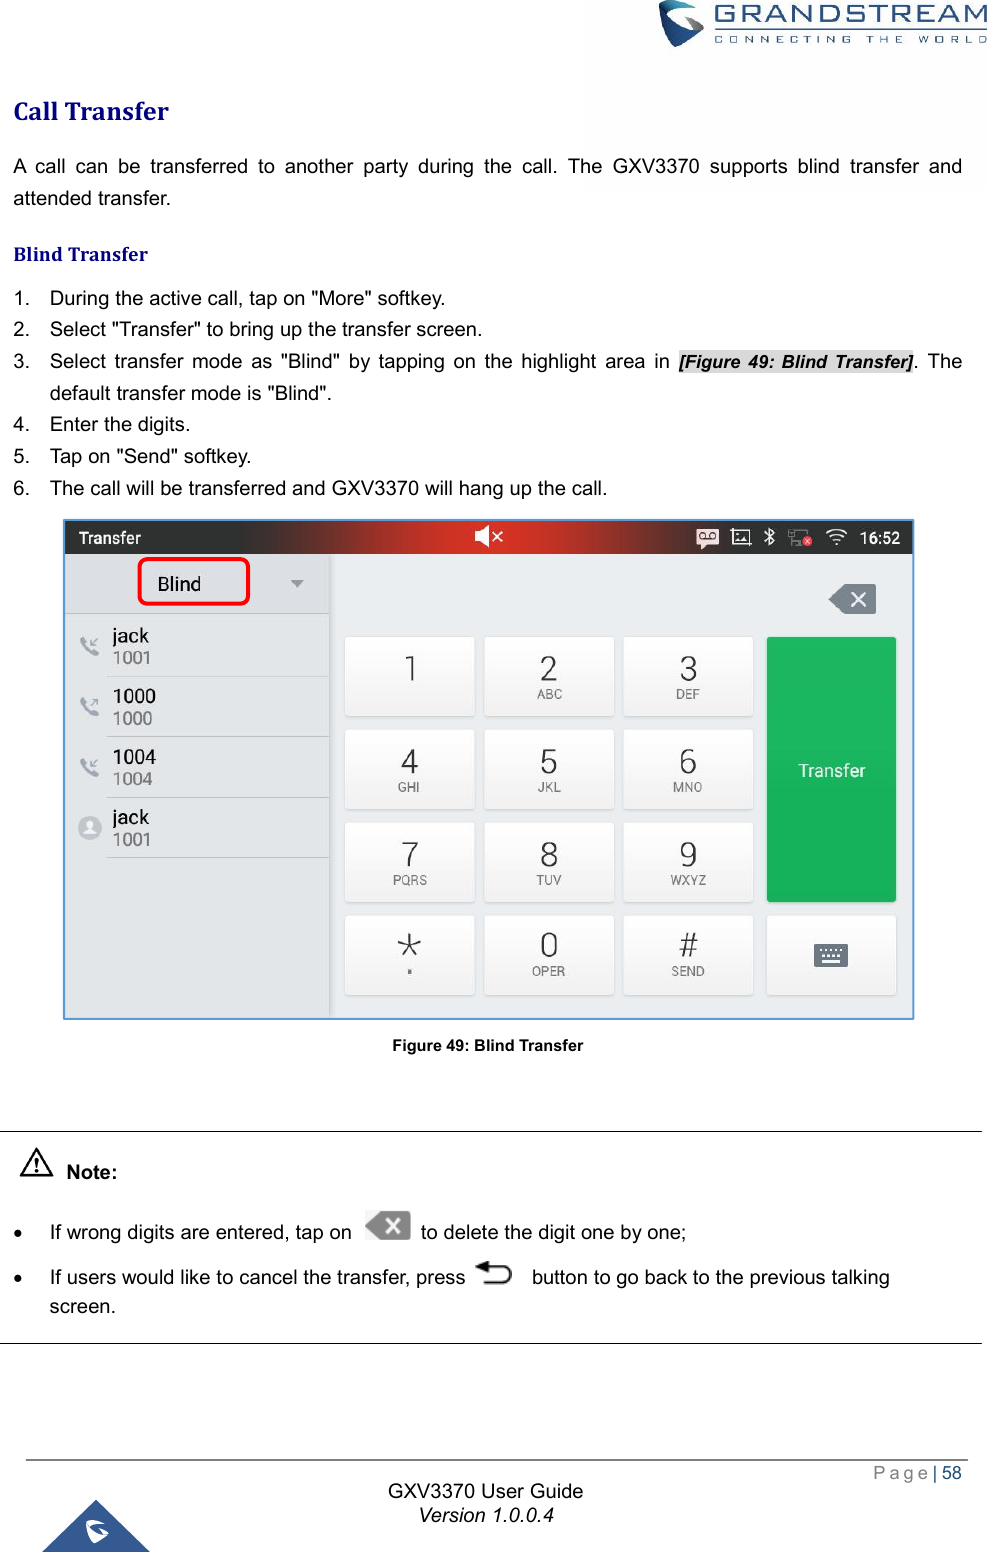  Page| 58  GXV3370 User Guide Version 1.0.0.4  Call Transfer A call can be transferred to another party during the call. The GXV3370 supports blind transfer and attended transfer. Blind Transfer 1. During the active call, tap on &quot;More&quot; softkey. 2. Select &quot;Transfer&quot; to bring up the transfer screen. 3. Select transfer mode as &quot;Blind&quot; by tapping on the highlight area in  [Figure 49: Blind Transfer]. The default transfer mode is &quot;Blind&quot;. 4. Enter the digits. 5. Tap on &quot;Send&quot; softkey. 6. The call will be transferred and GXV3370 will hang up the call.  Figure 49: Blind Transfer    Note: · If wrong digits are entered, tap on   to delete the digit one by one; · If users would like to cancel the transfer, press    button to go back to the previous talking screen.  